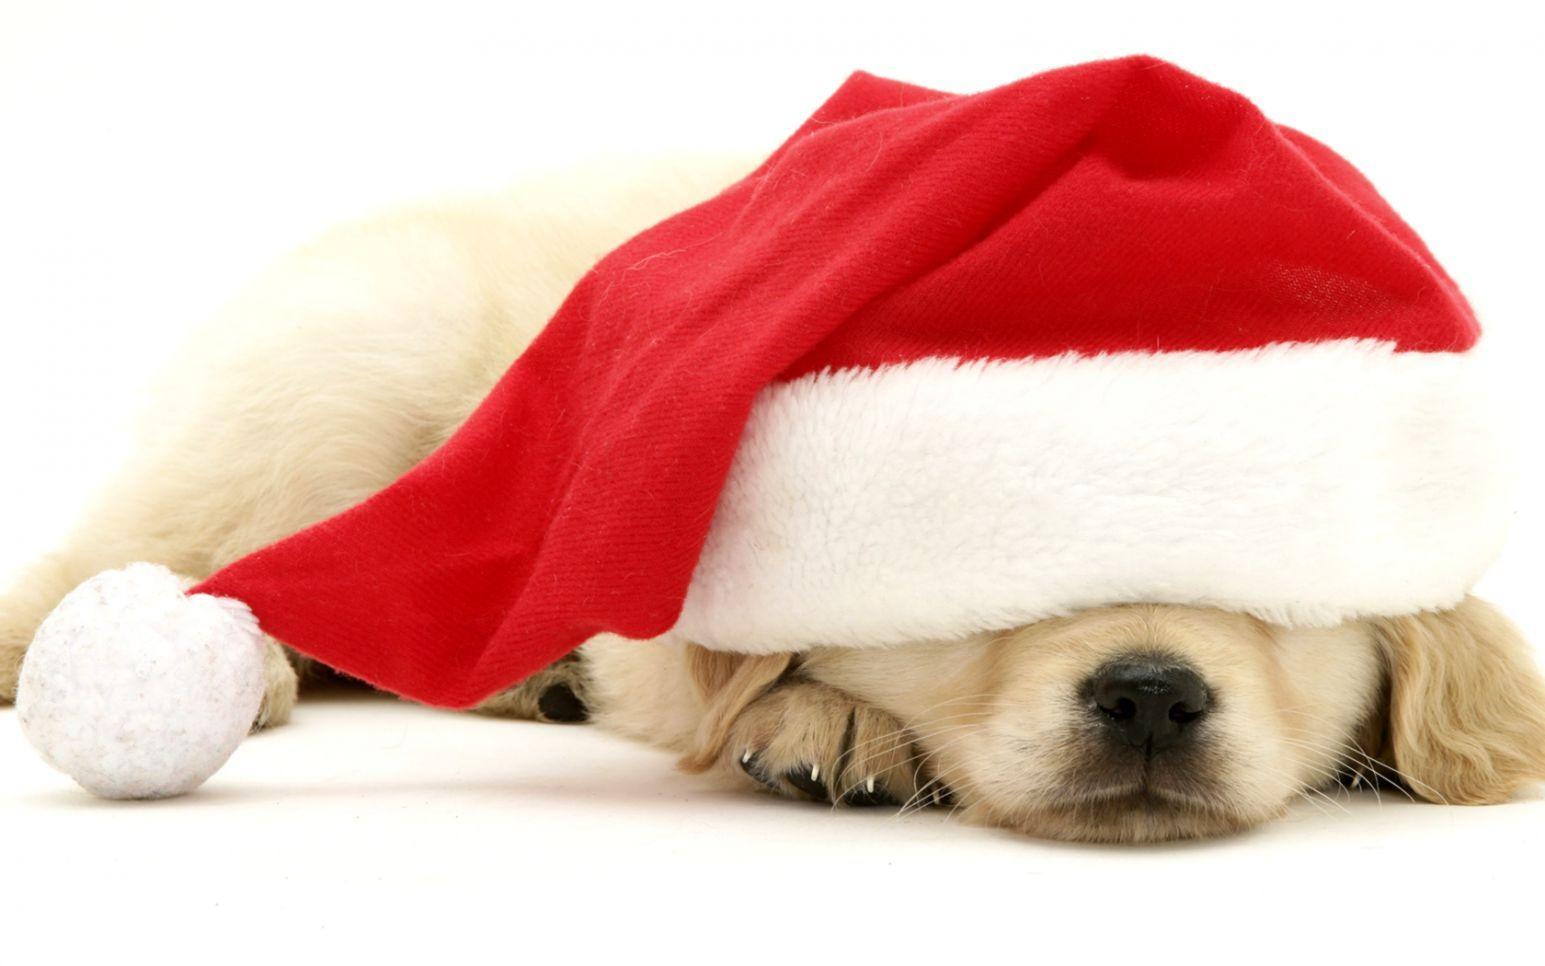 Puppy Christmas Computer Backgrounds